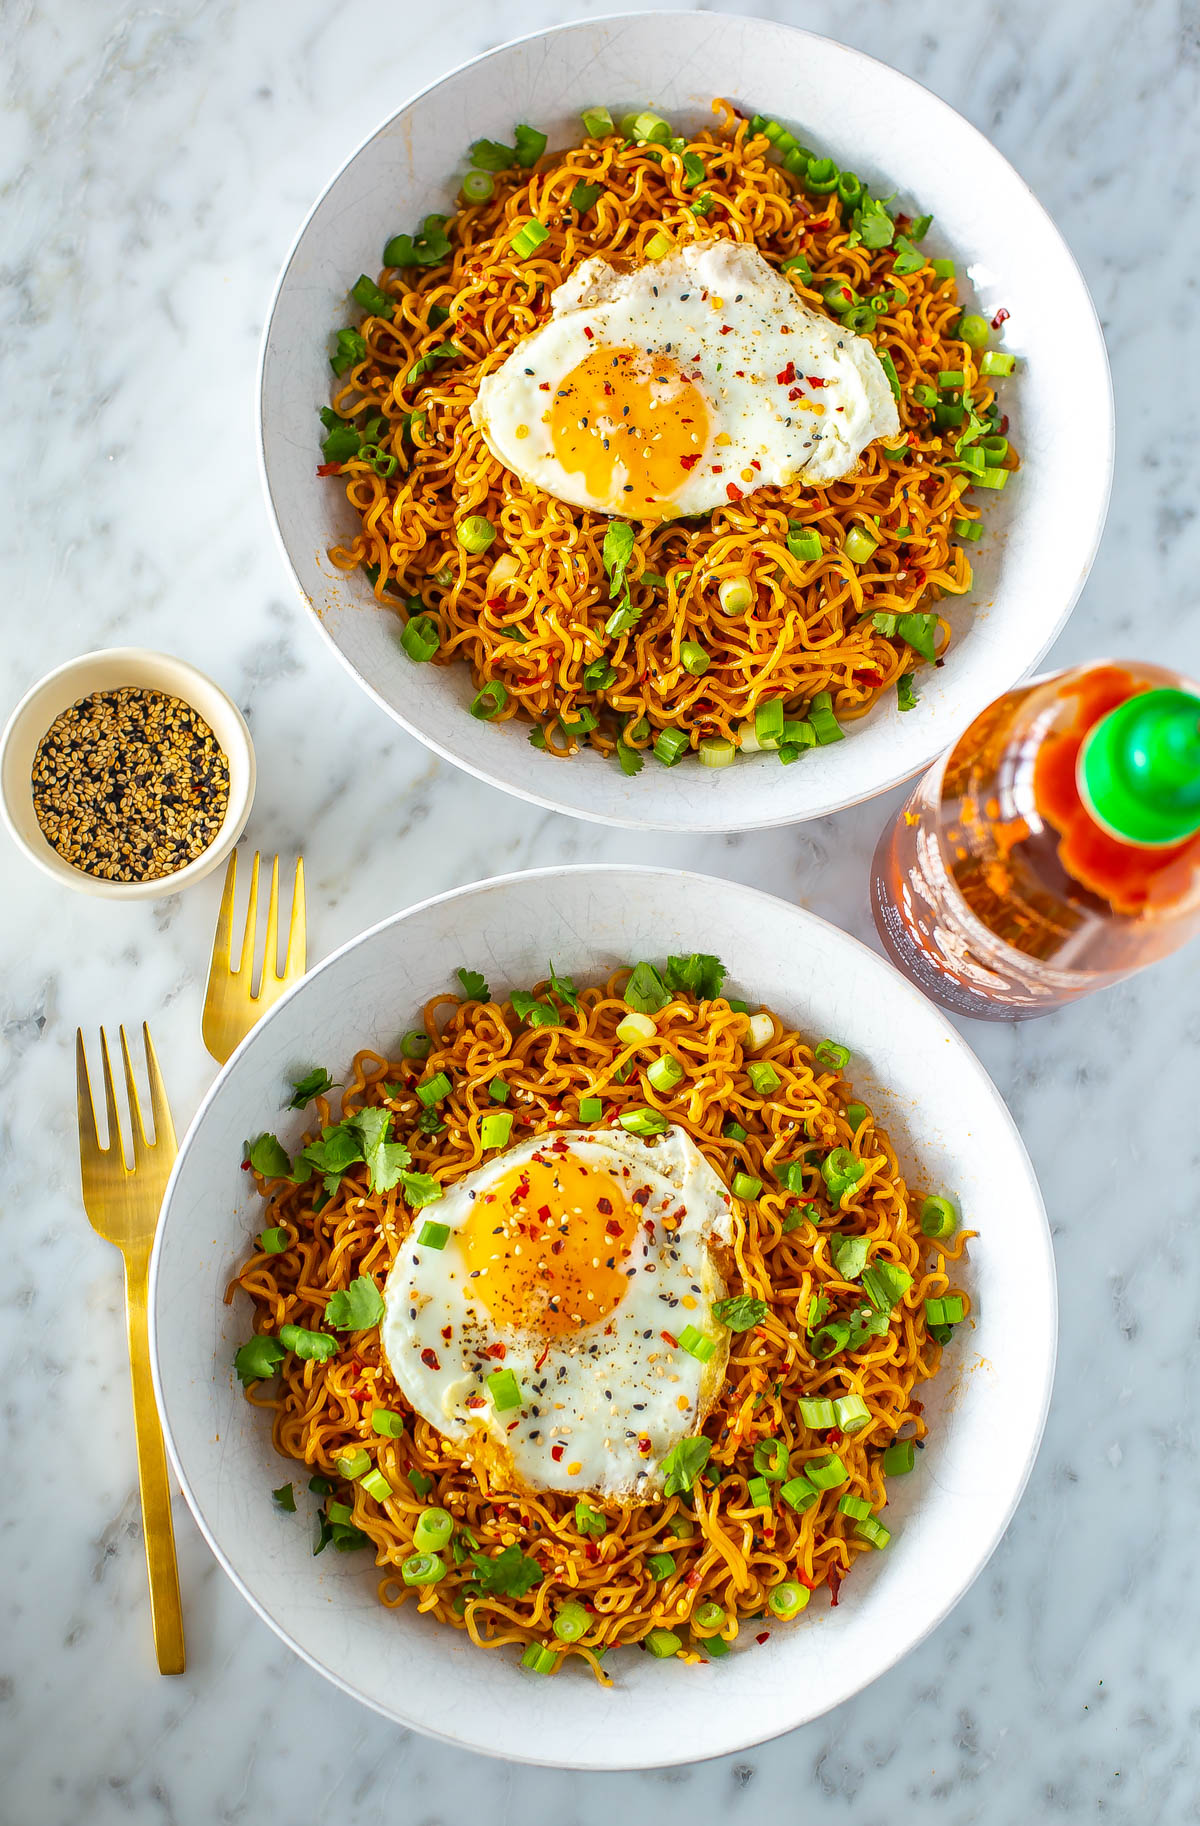 Two bowls of spicy noodles, each topped with a fried egg and green onions.